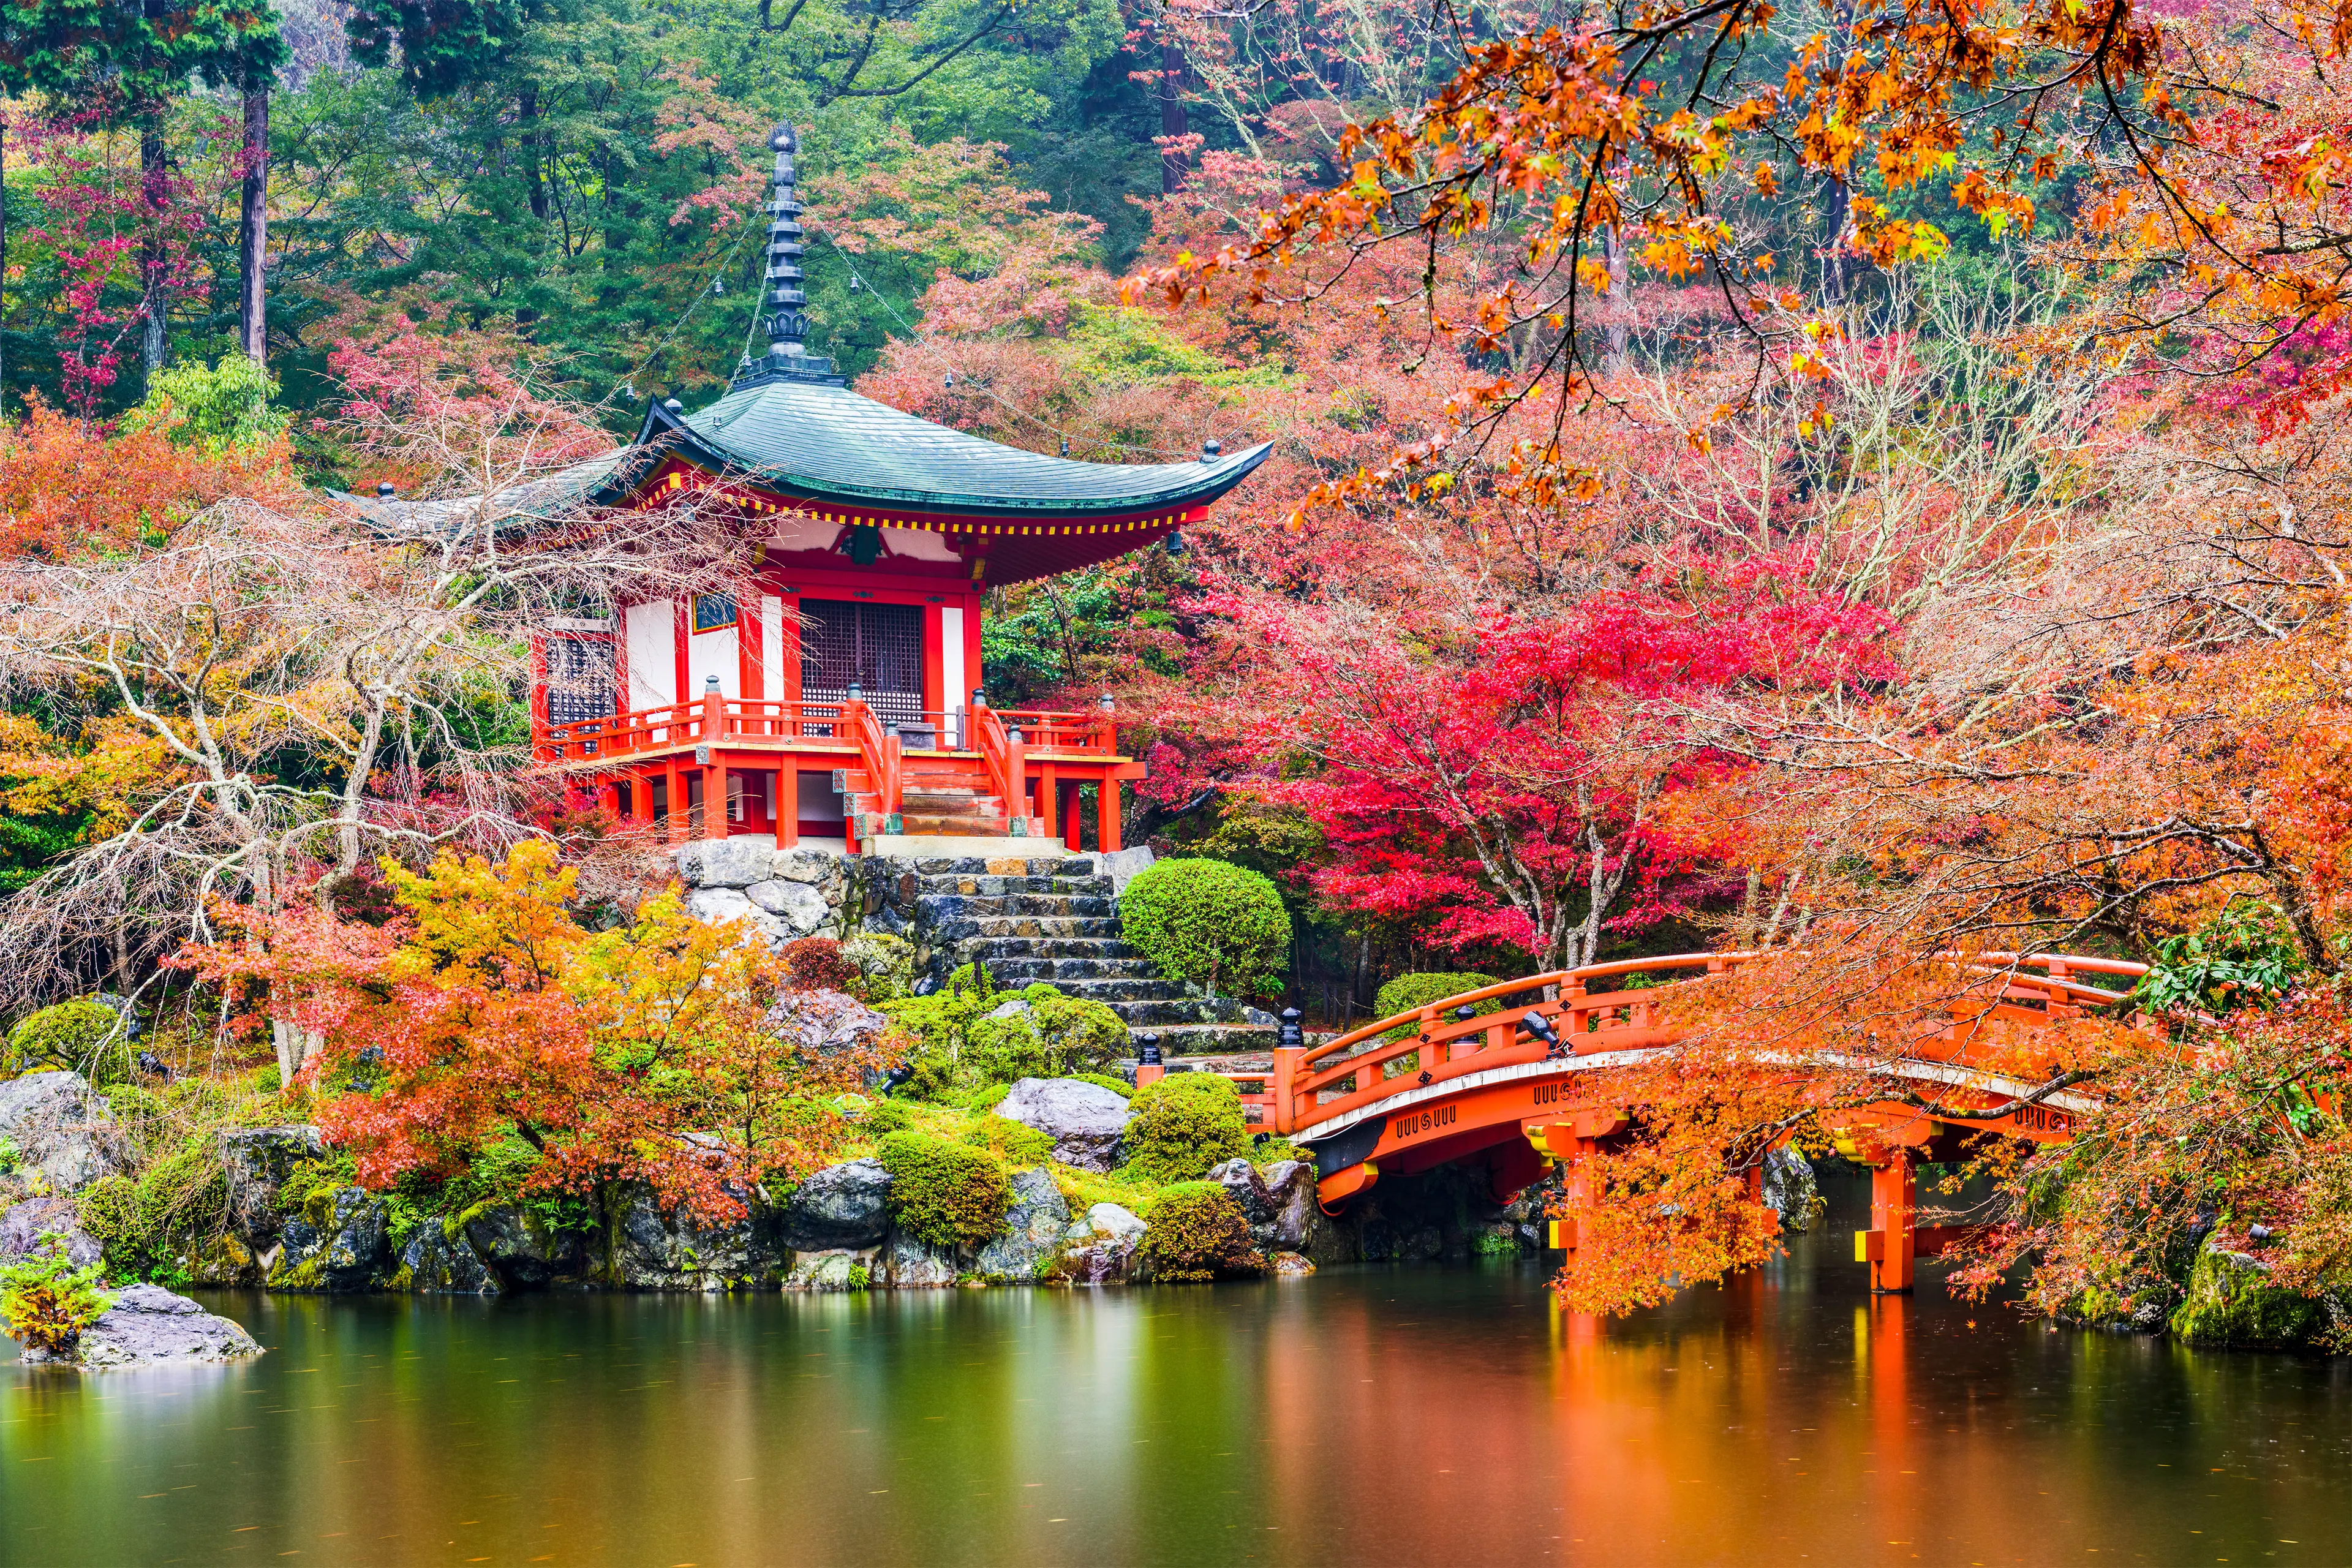 1-Day Outdoor Sightseeing Adventure in Kyoto, Japan